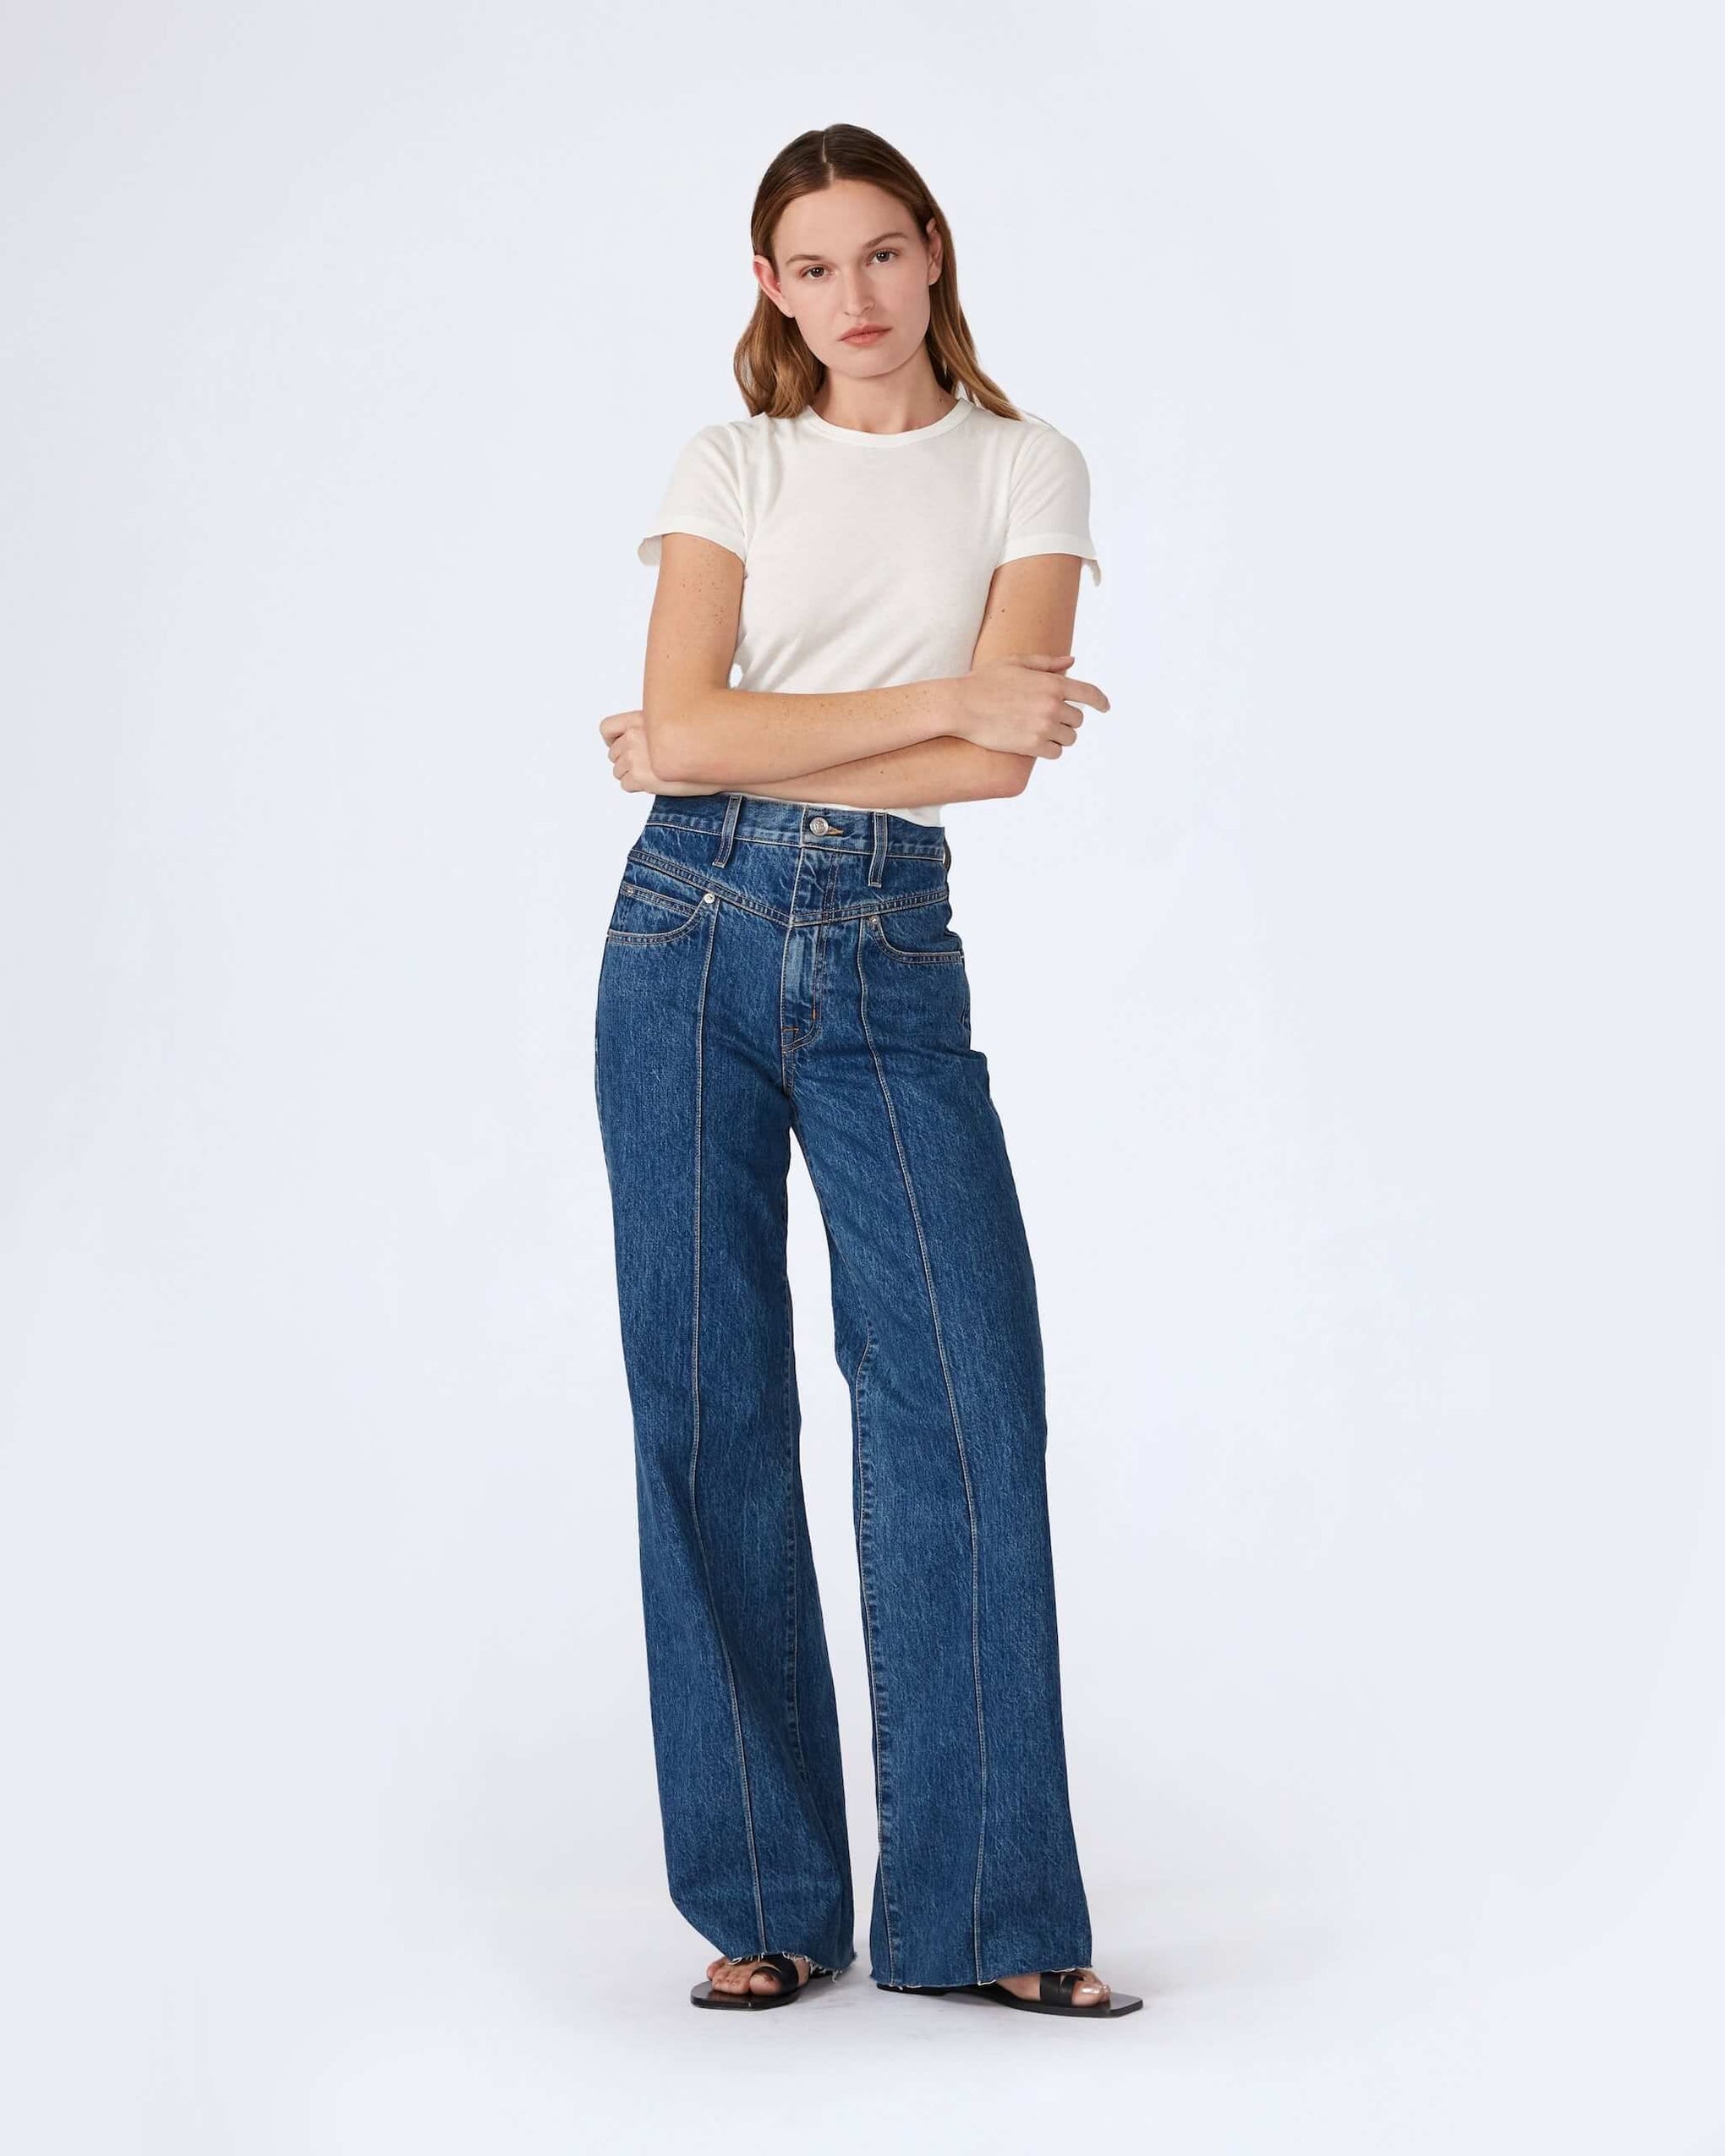 SLVRLAKE Grace Double Yoke Pintuck Jean in Start Me Up available at TNT The New Trend Australia. Free shipping on orders over $300 AUD.